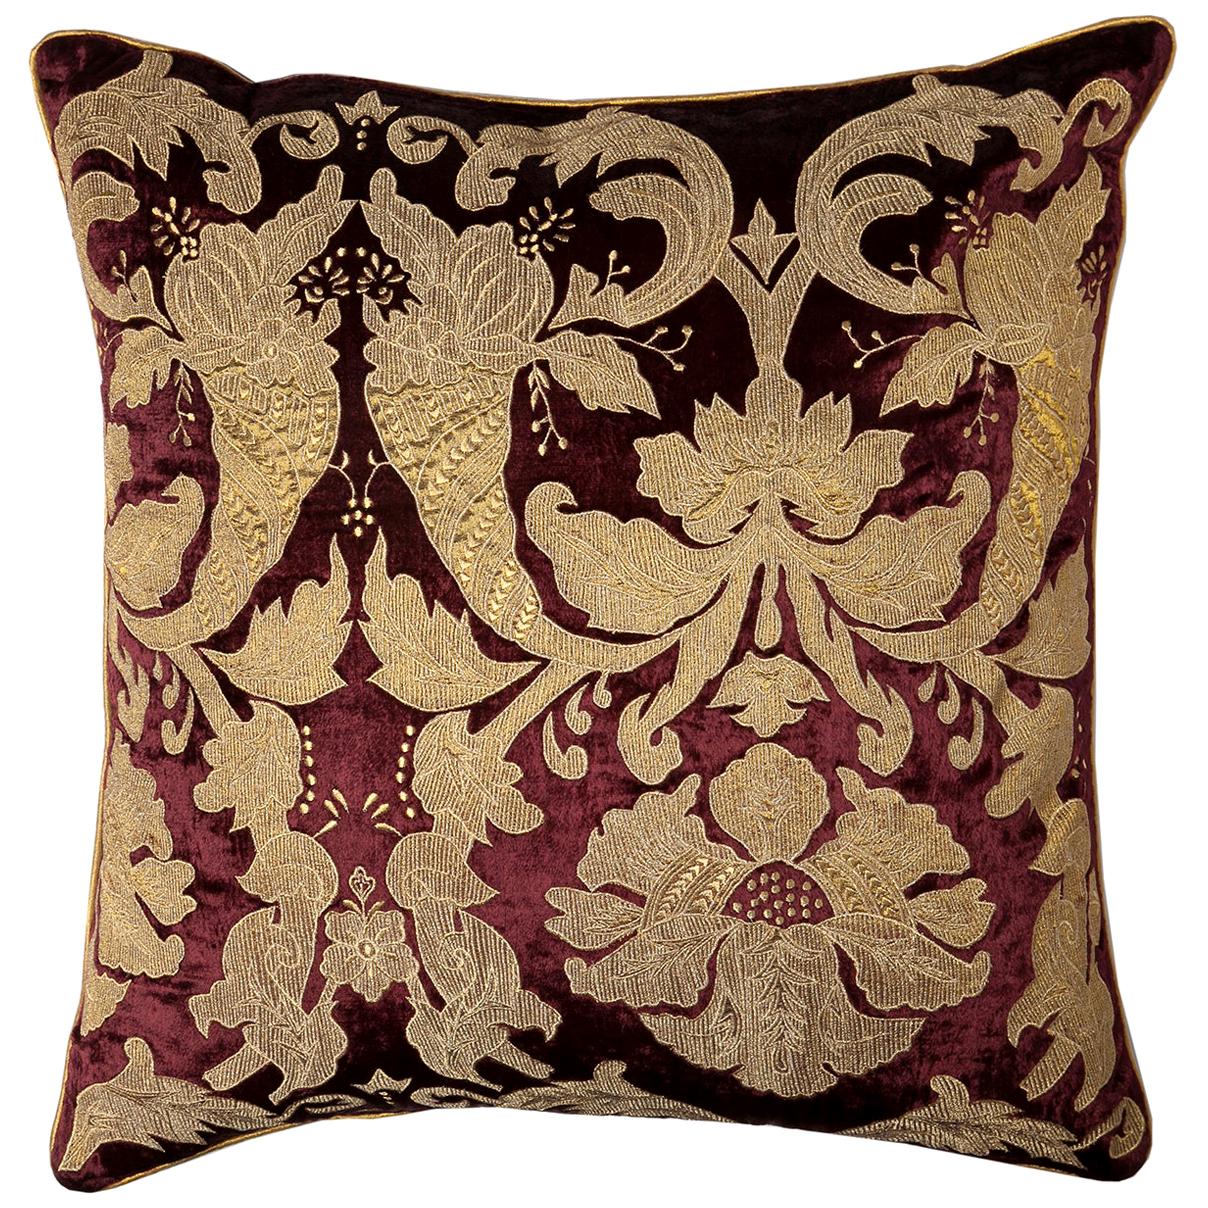 Large Burgundy Velvet Throw Pillow with Gold Embroidery by Zuber For Sale